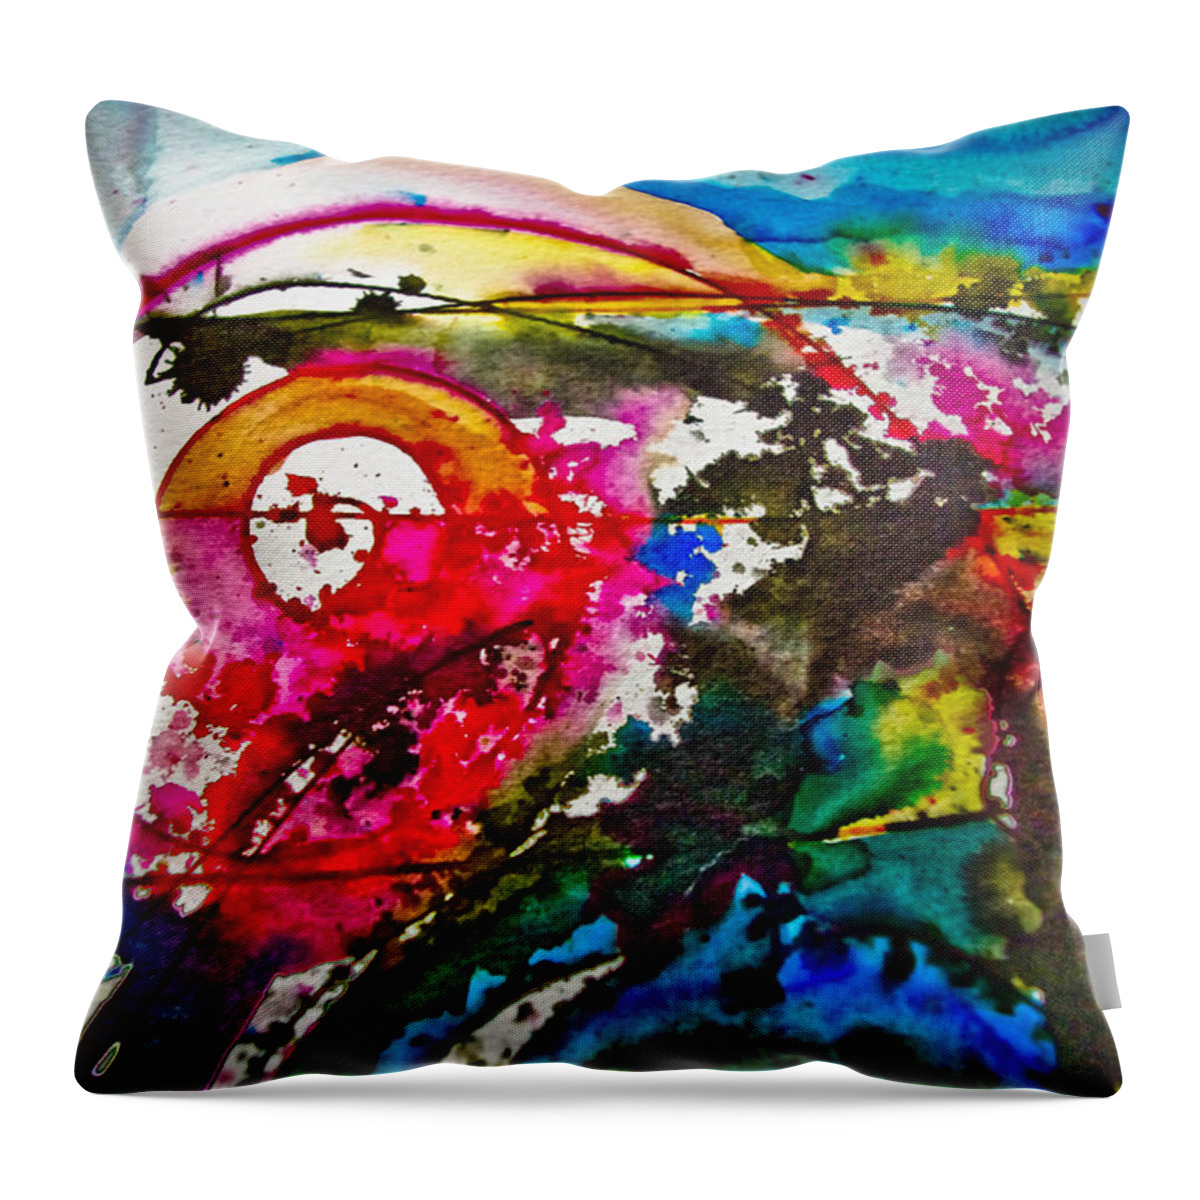 Watercolor Throw Pillow featuring the painting Magenta Spiral by Adria Trail